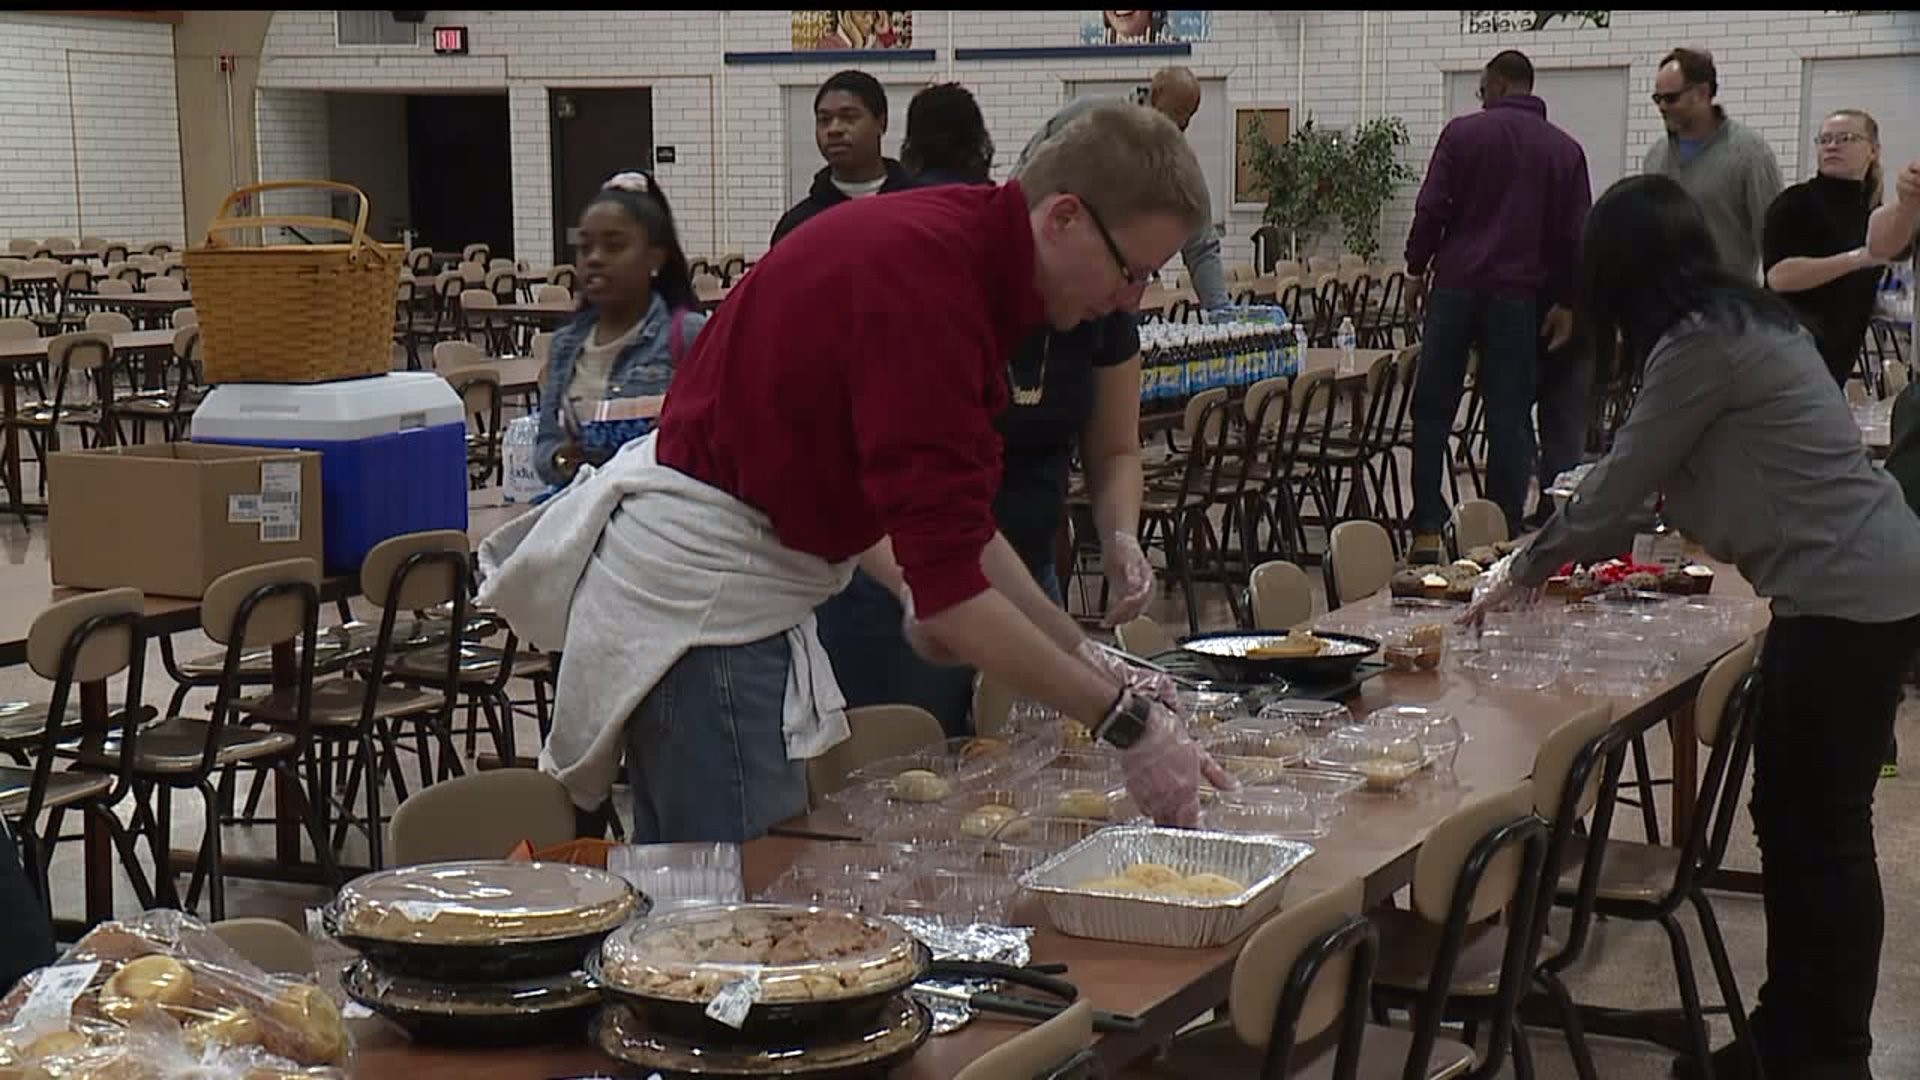 "Plate Patrol" passes out meals for those in need